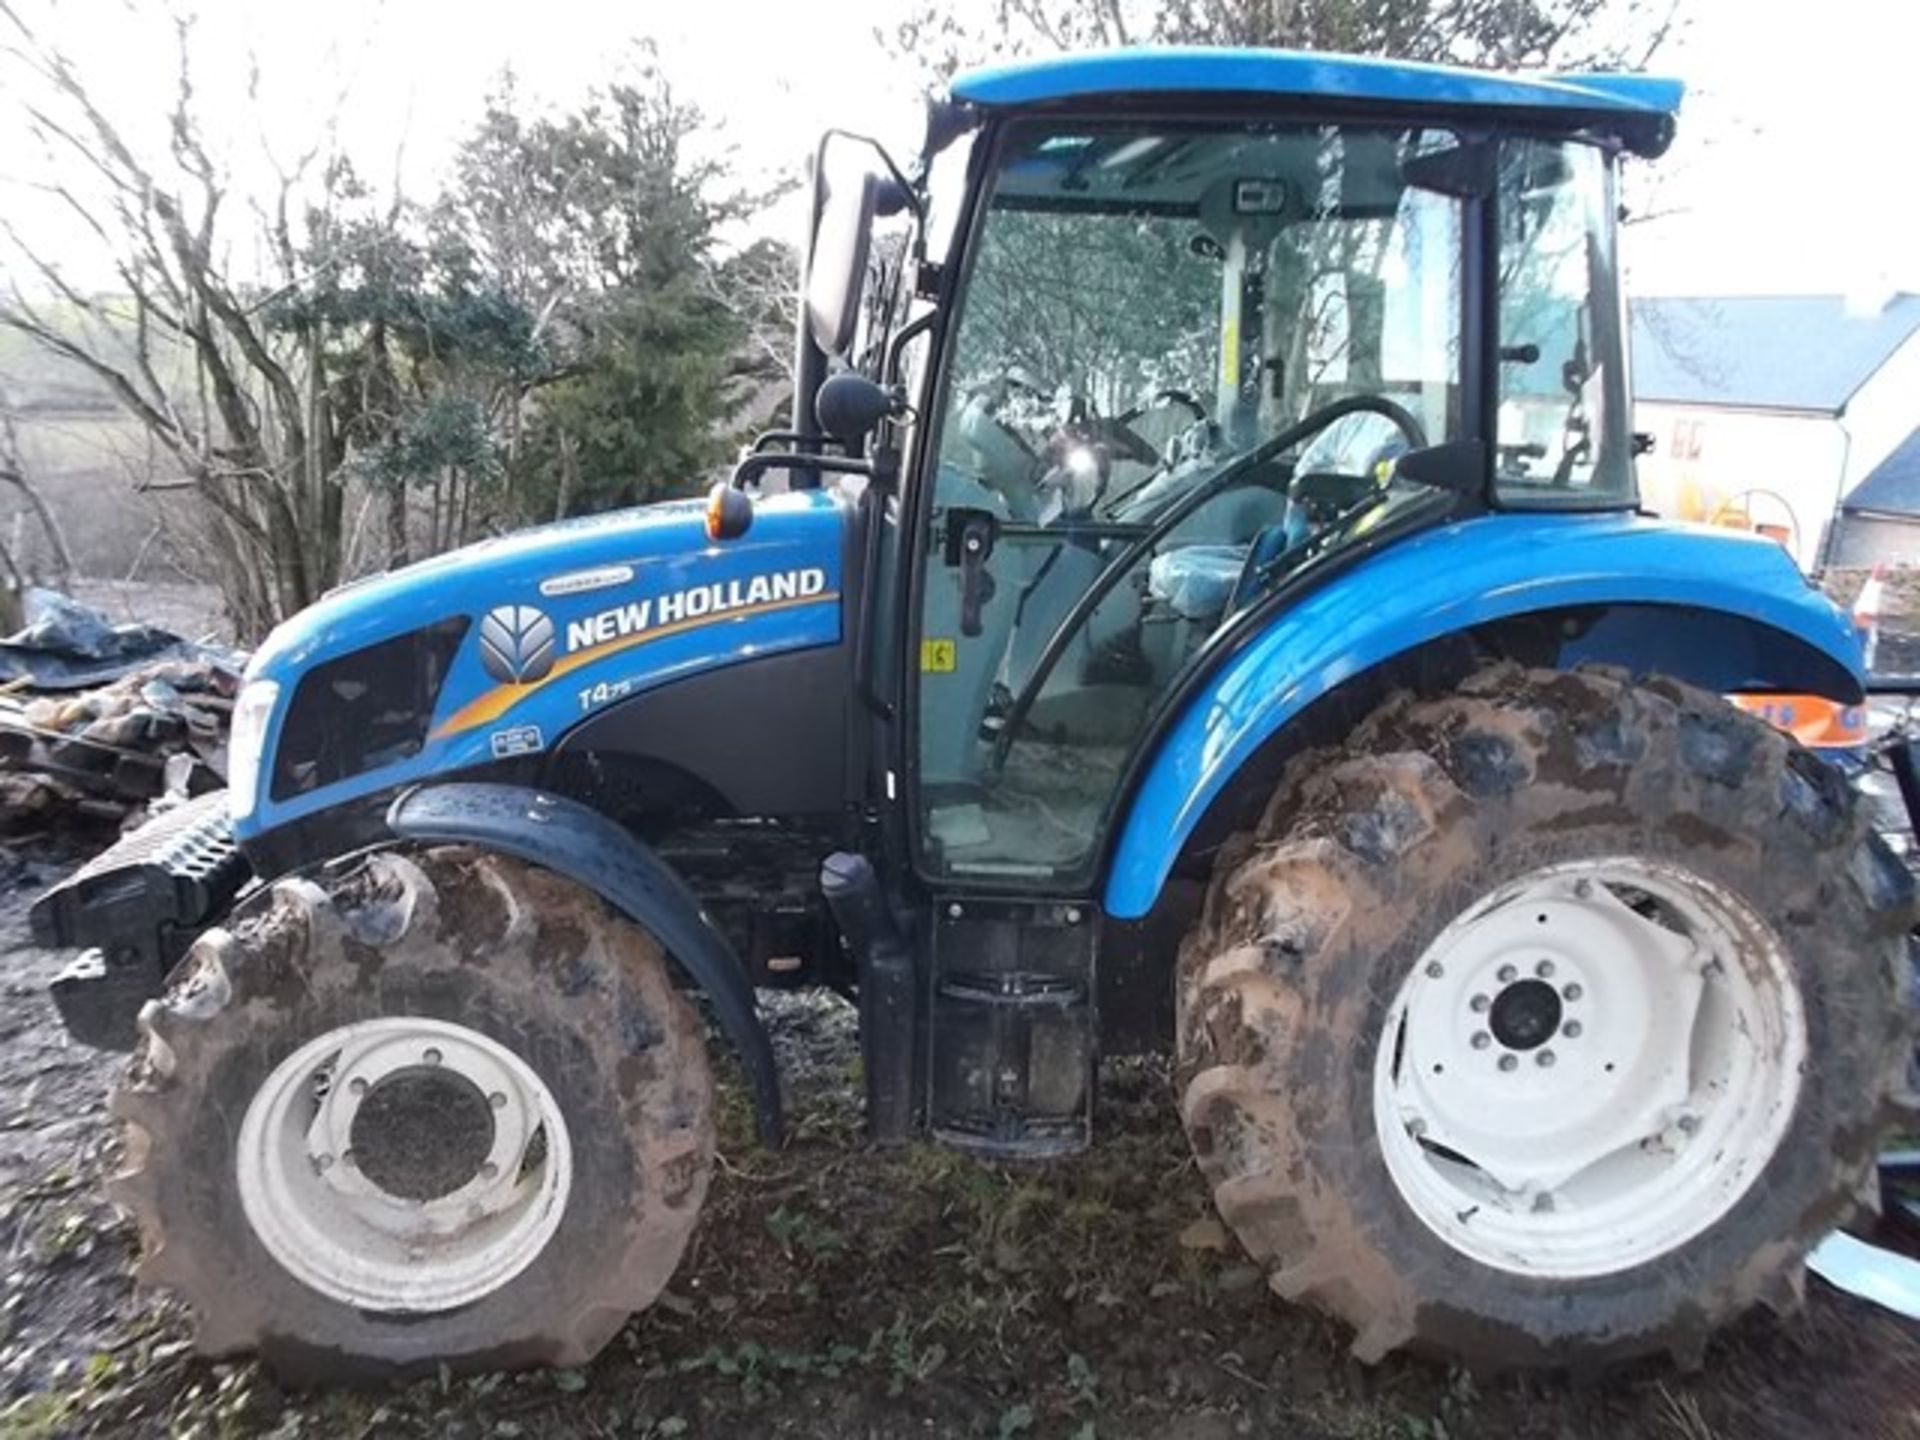 New Holland T4.75 Powerstar four wheel drive tractor with 10 x 40kg front weights, Registration... - Image 6 of 12